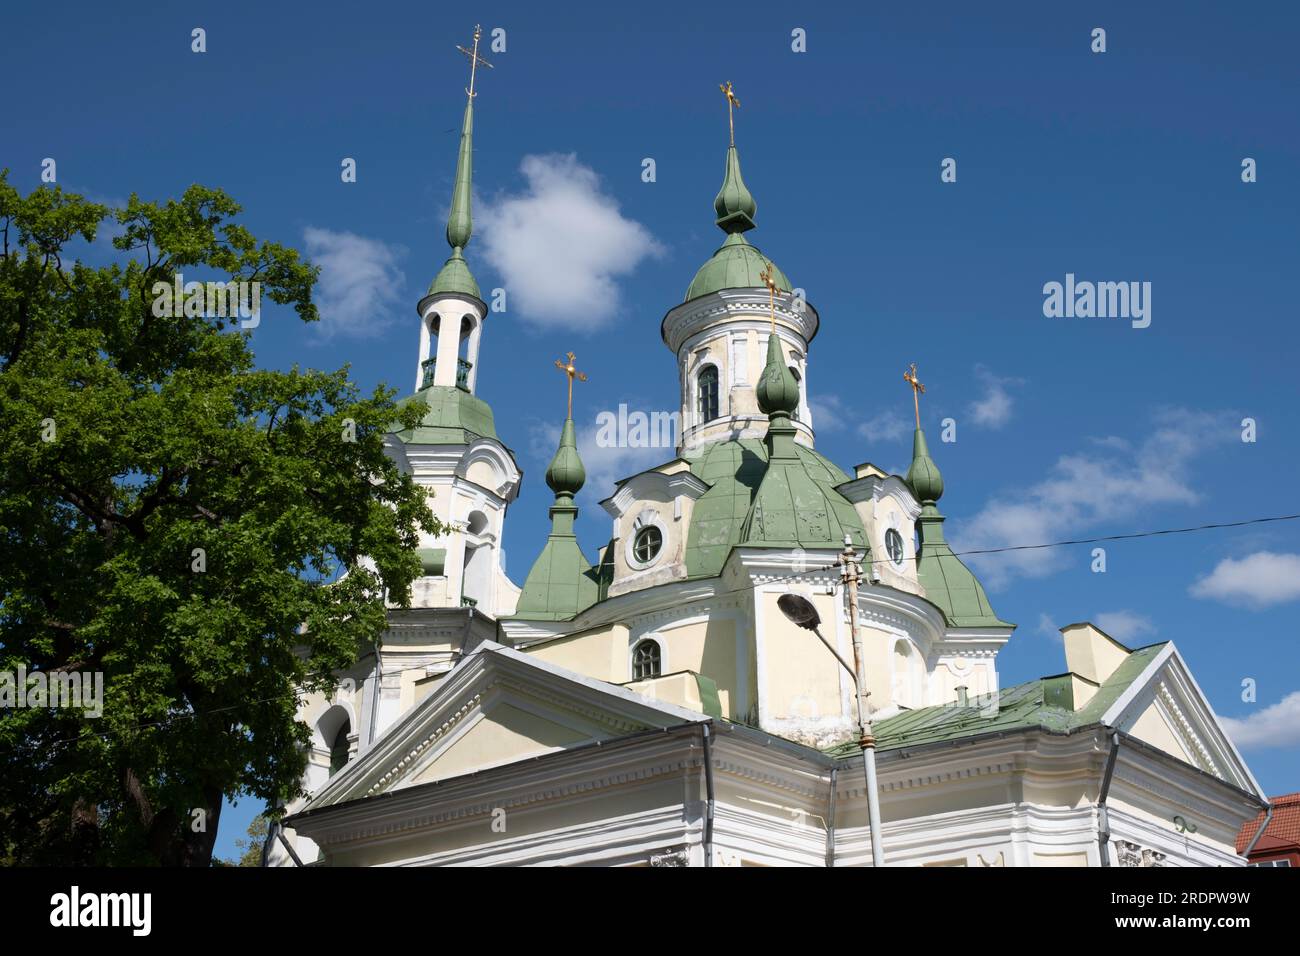 St. Catherine's Church, a Russian Orthodox church with a needle-pointed spire in Pärnu, Estonia Stock Photo